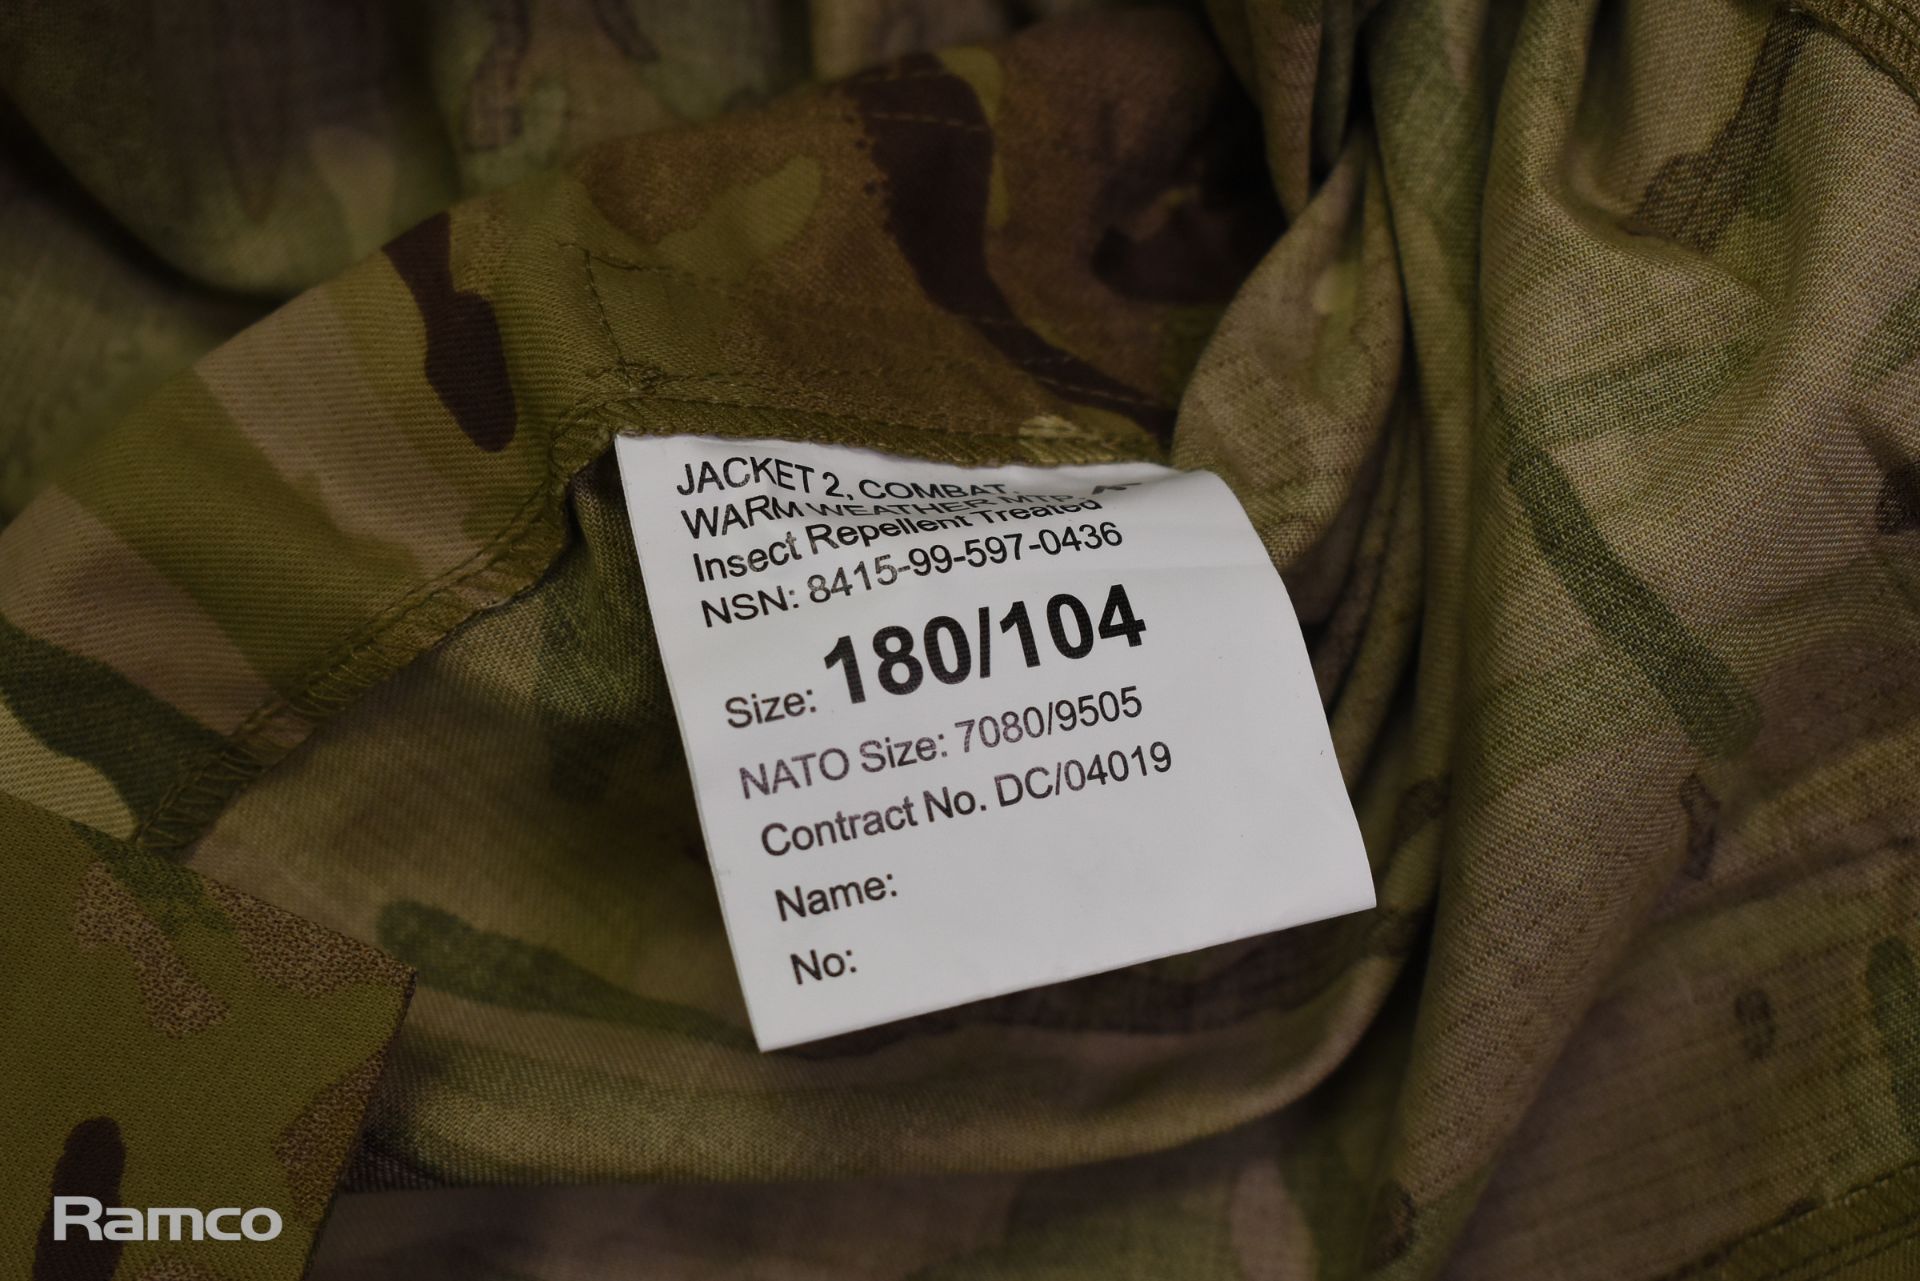 30x British Army MTP combat jackets - mixed types - mixed grades and sizes - Image 10 of 10